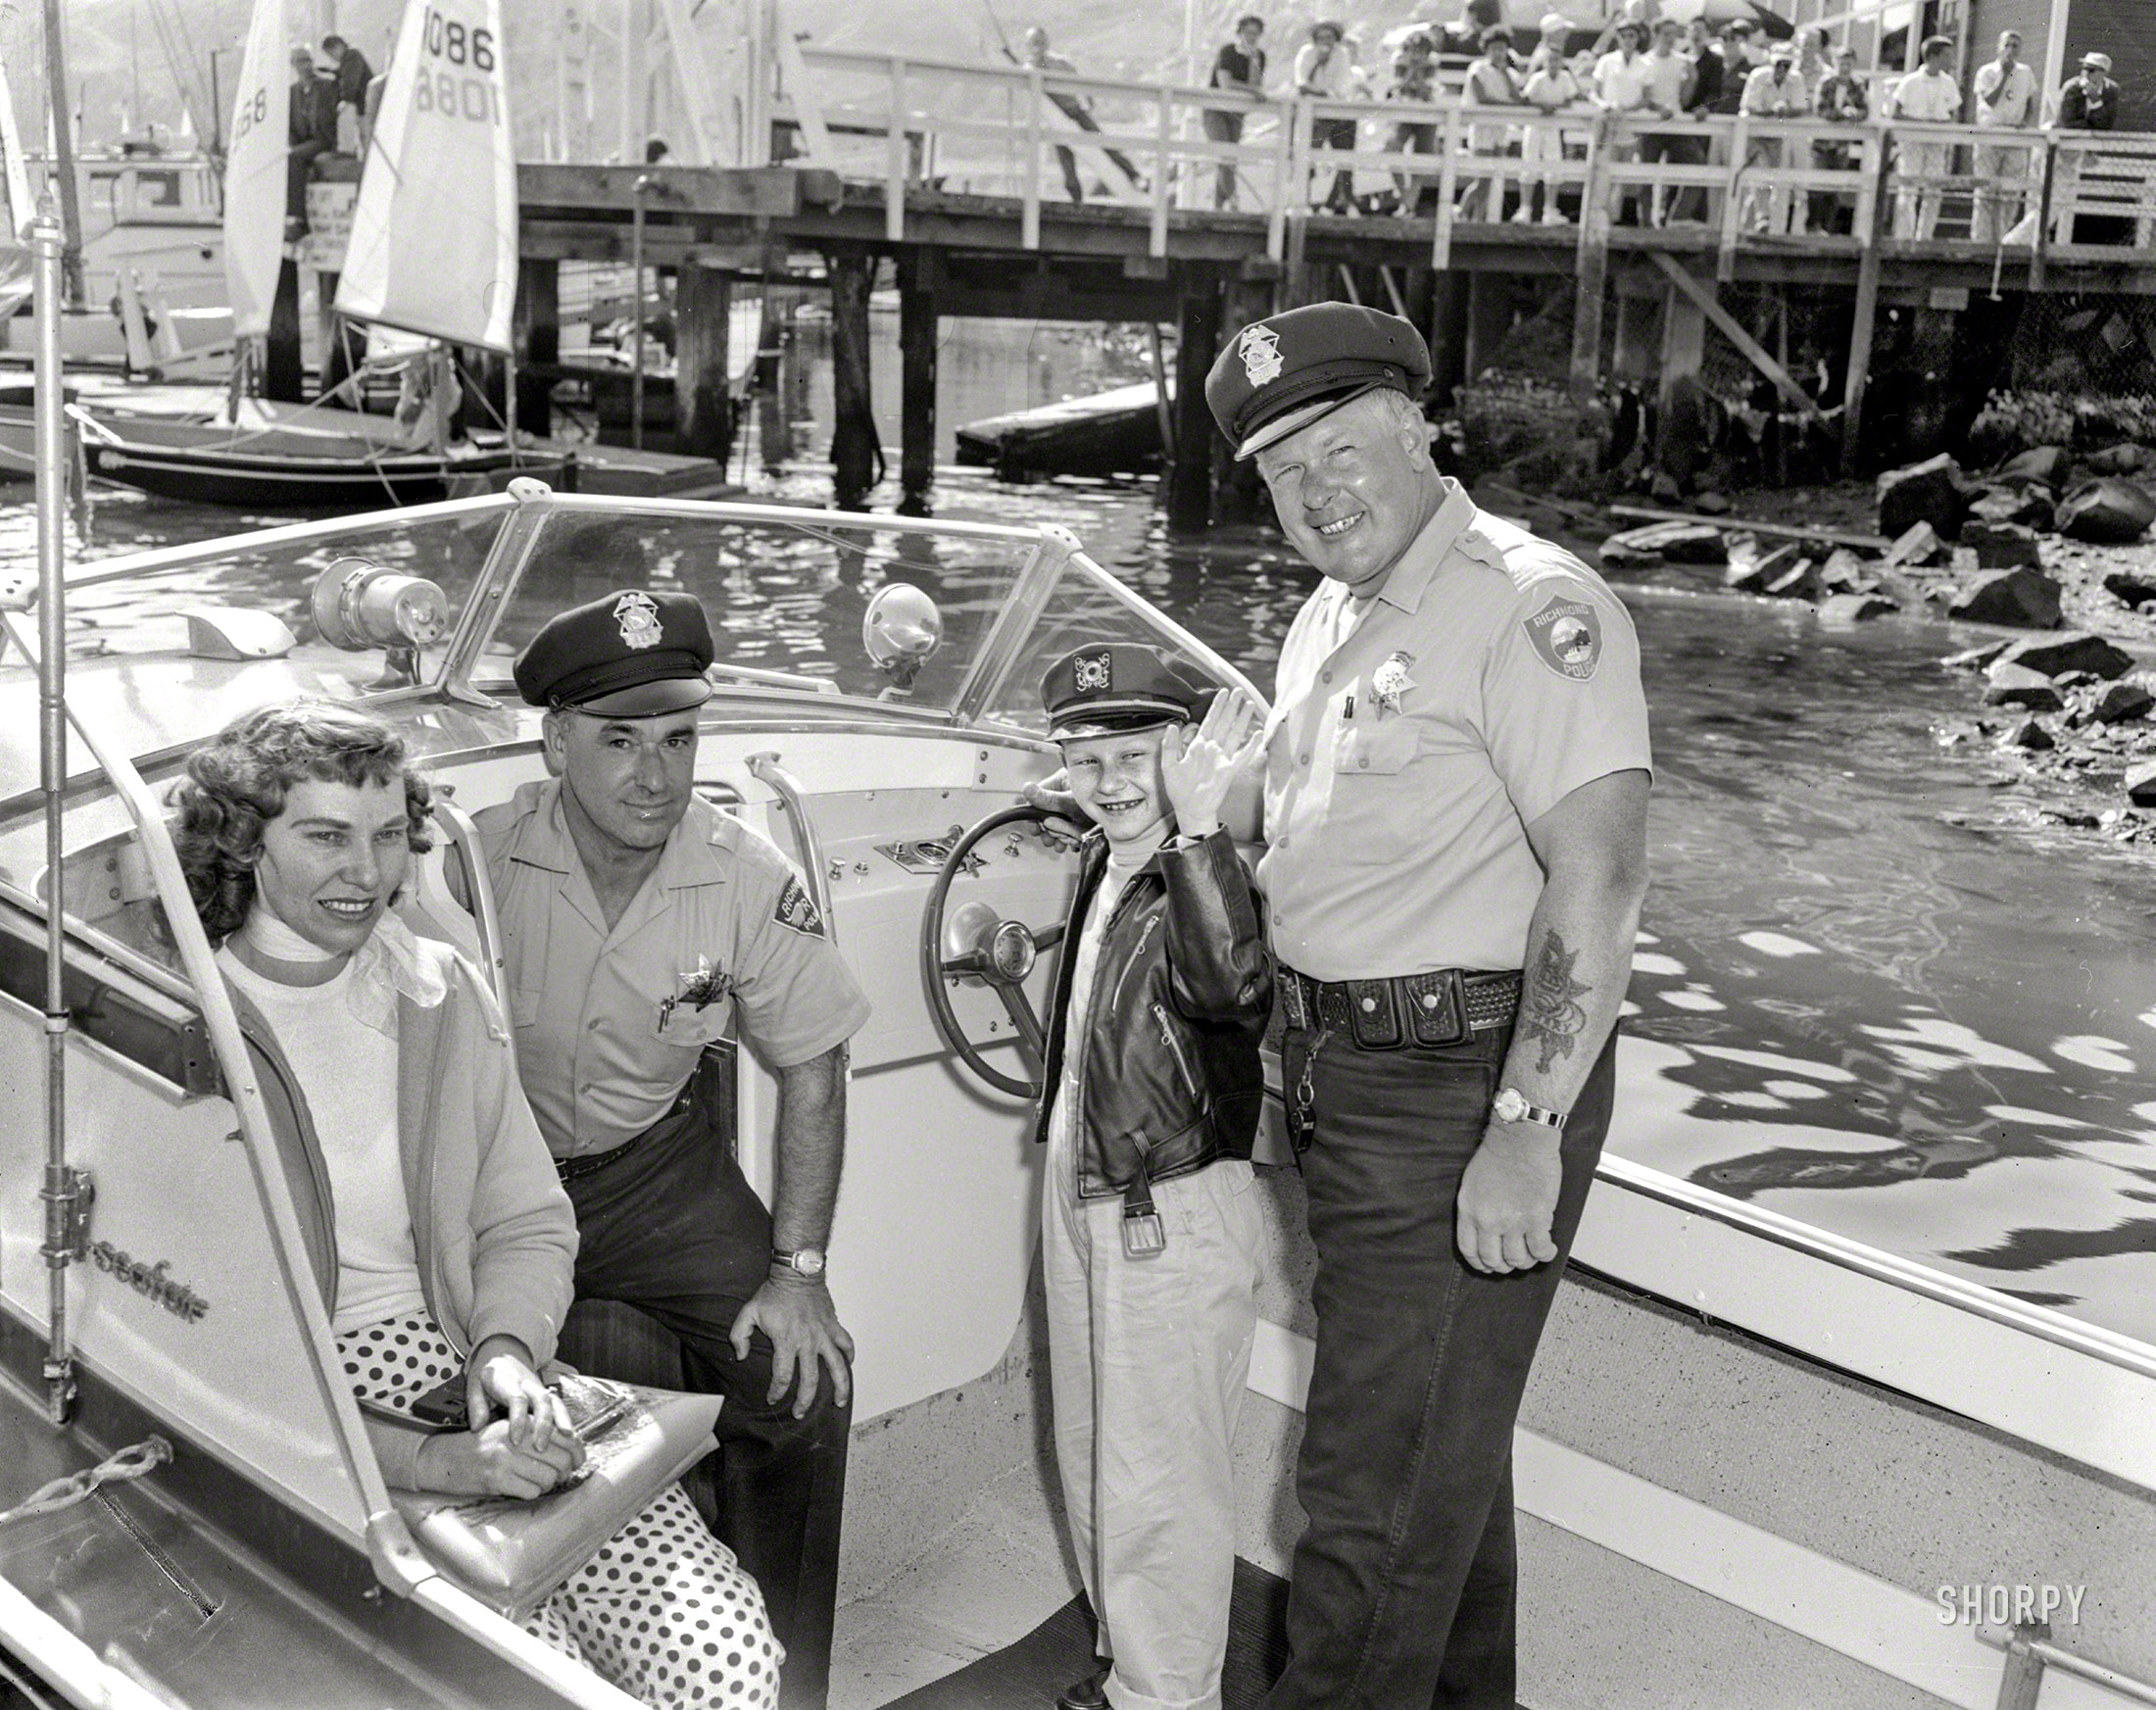 &nbsp; &nbsp; &nbsp; &nbsp; UPDATE: For the story behind this photo, click here and scroll down to the comments.
October 2, 1960. Richmond, California. "Harbor Patrol." Rickey Stowell helming a Glasspar Seafair. 4x5 inch acetate negative from the Shorpy News Photo Archive. View full size.